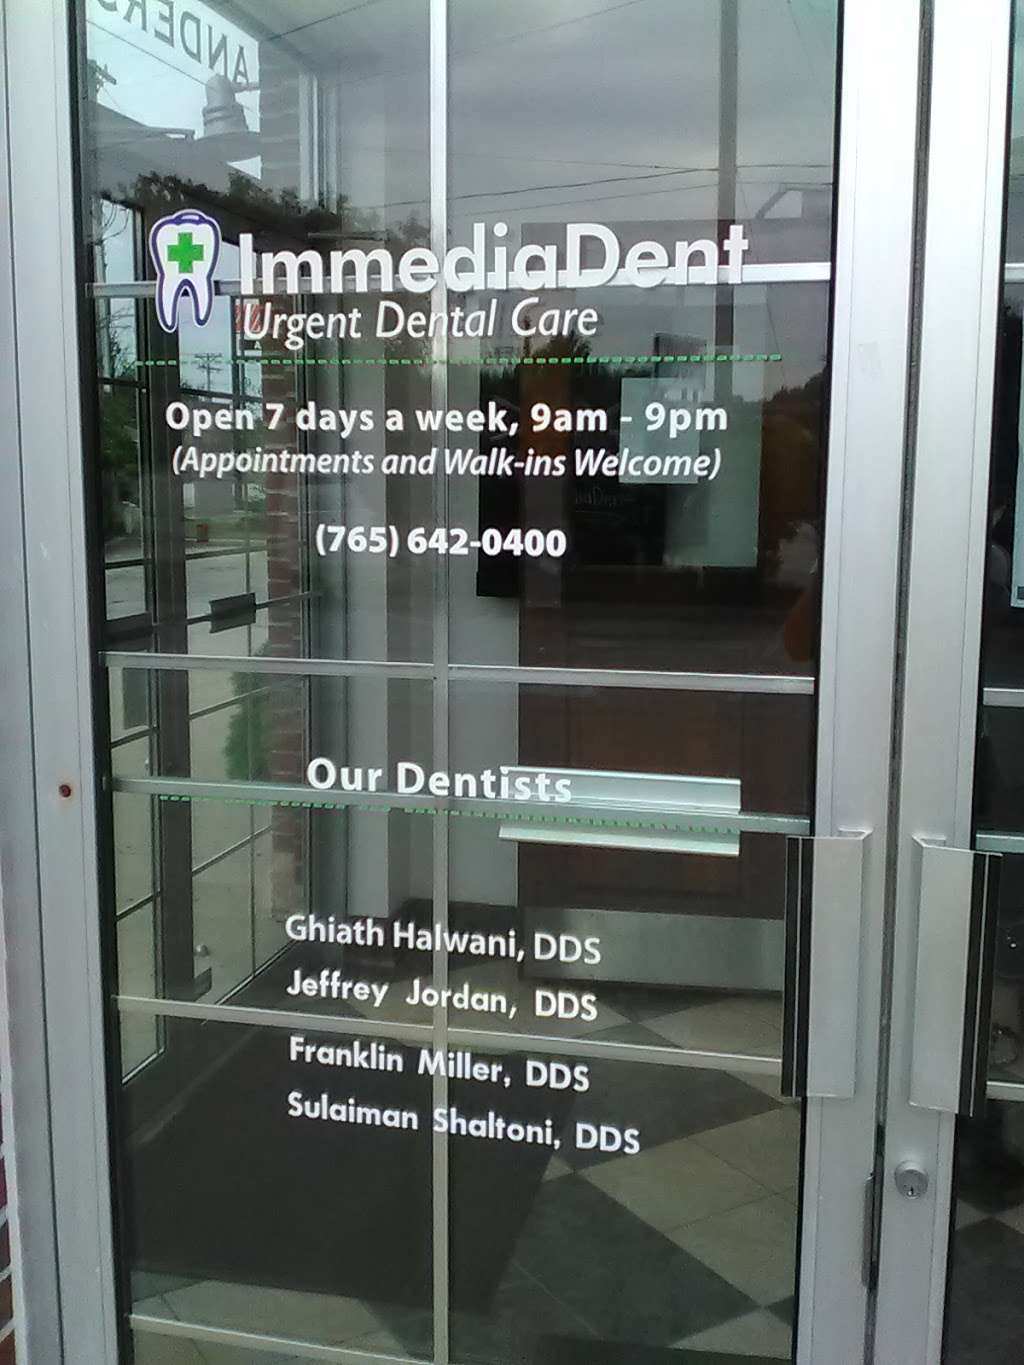 ImmediaDent - Urgent Dental Care | 2128 Mounds Rd, Anderson, IN 46016 | Phone: (765) 642-0400